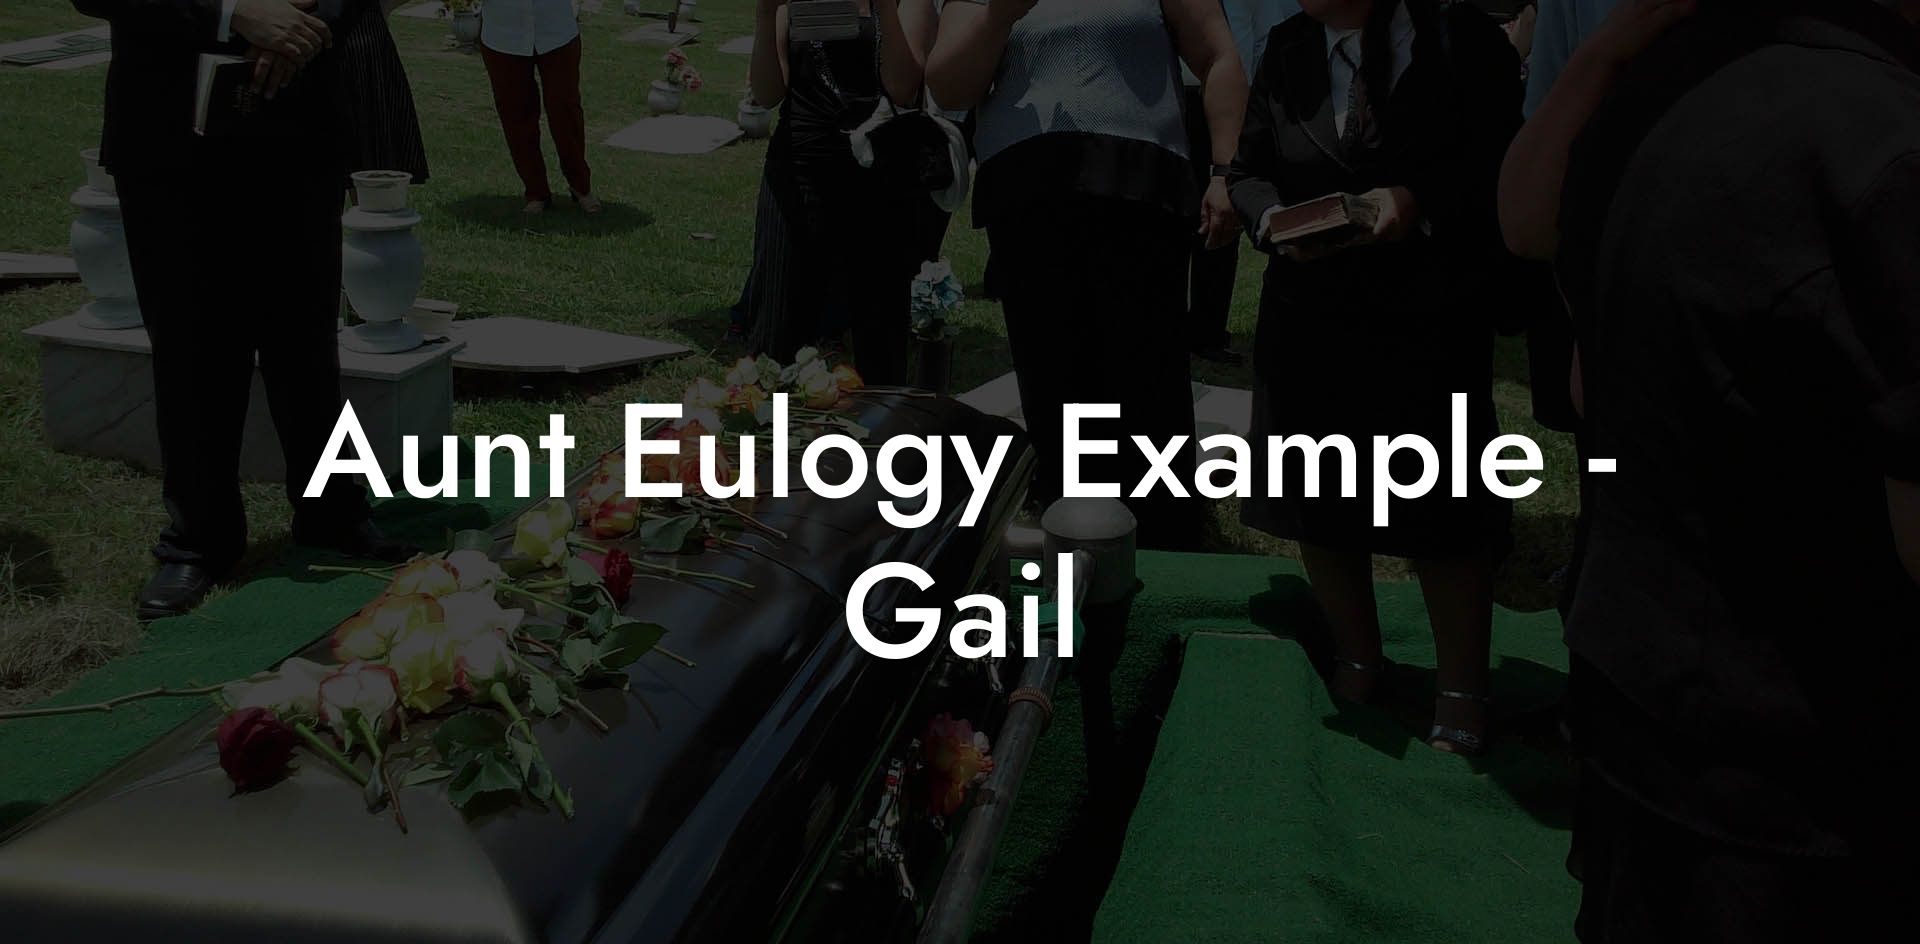 Aunt Eulogy Example - Gail